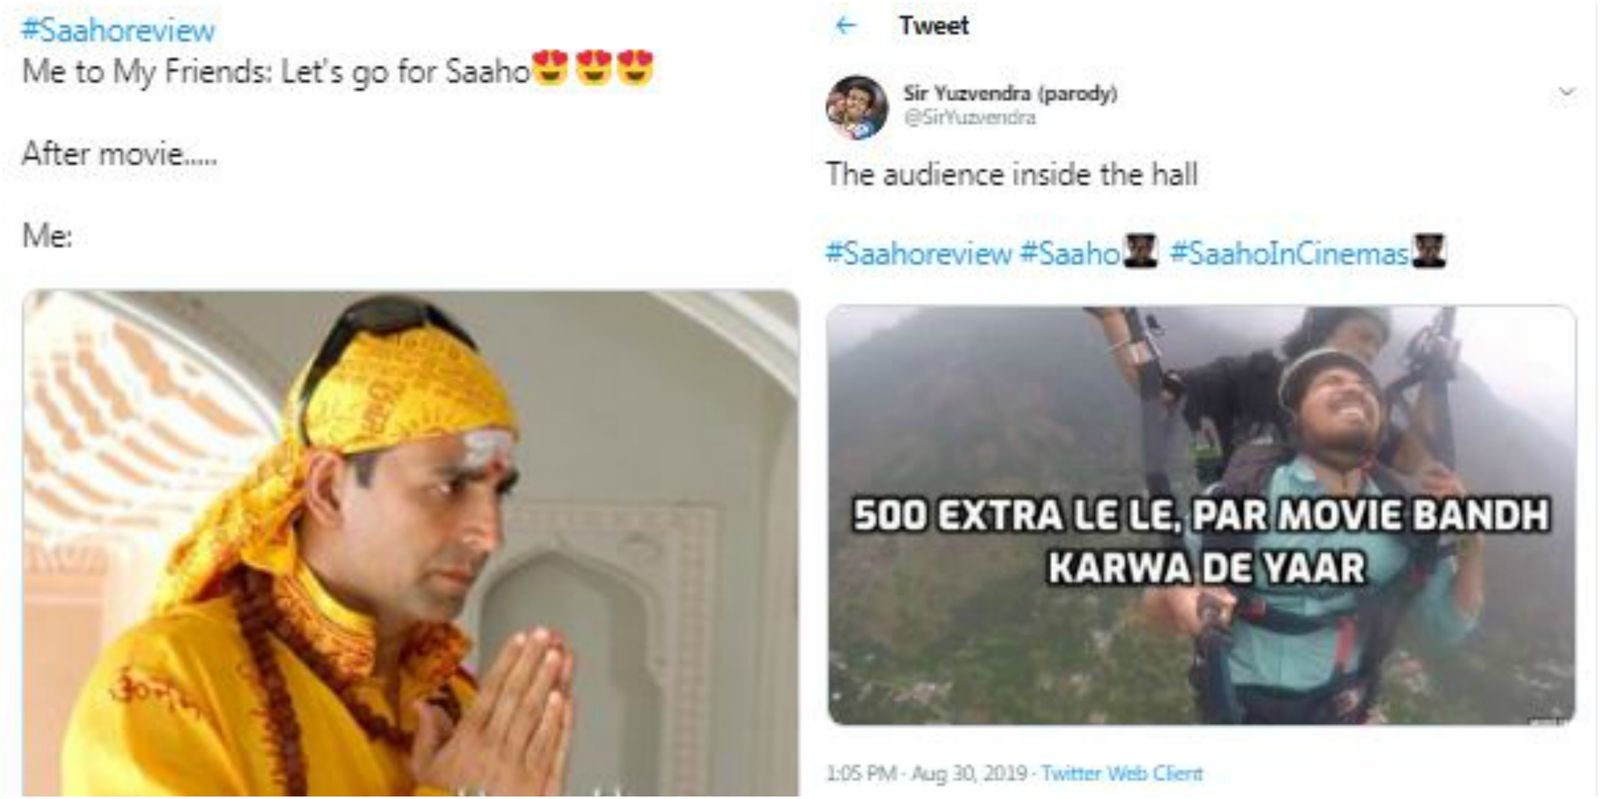 Saaho: So The Buzz On Twitter Is That These Memes Are More Enjoyable Than The Prabhas-Shraddha Starrer